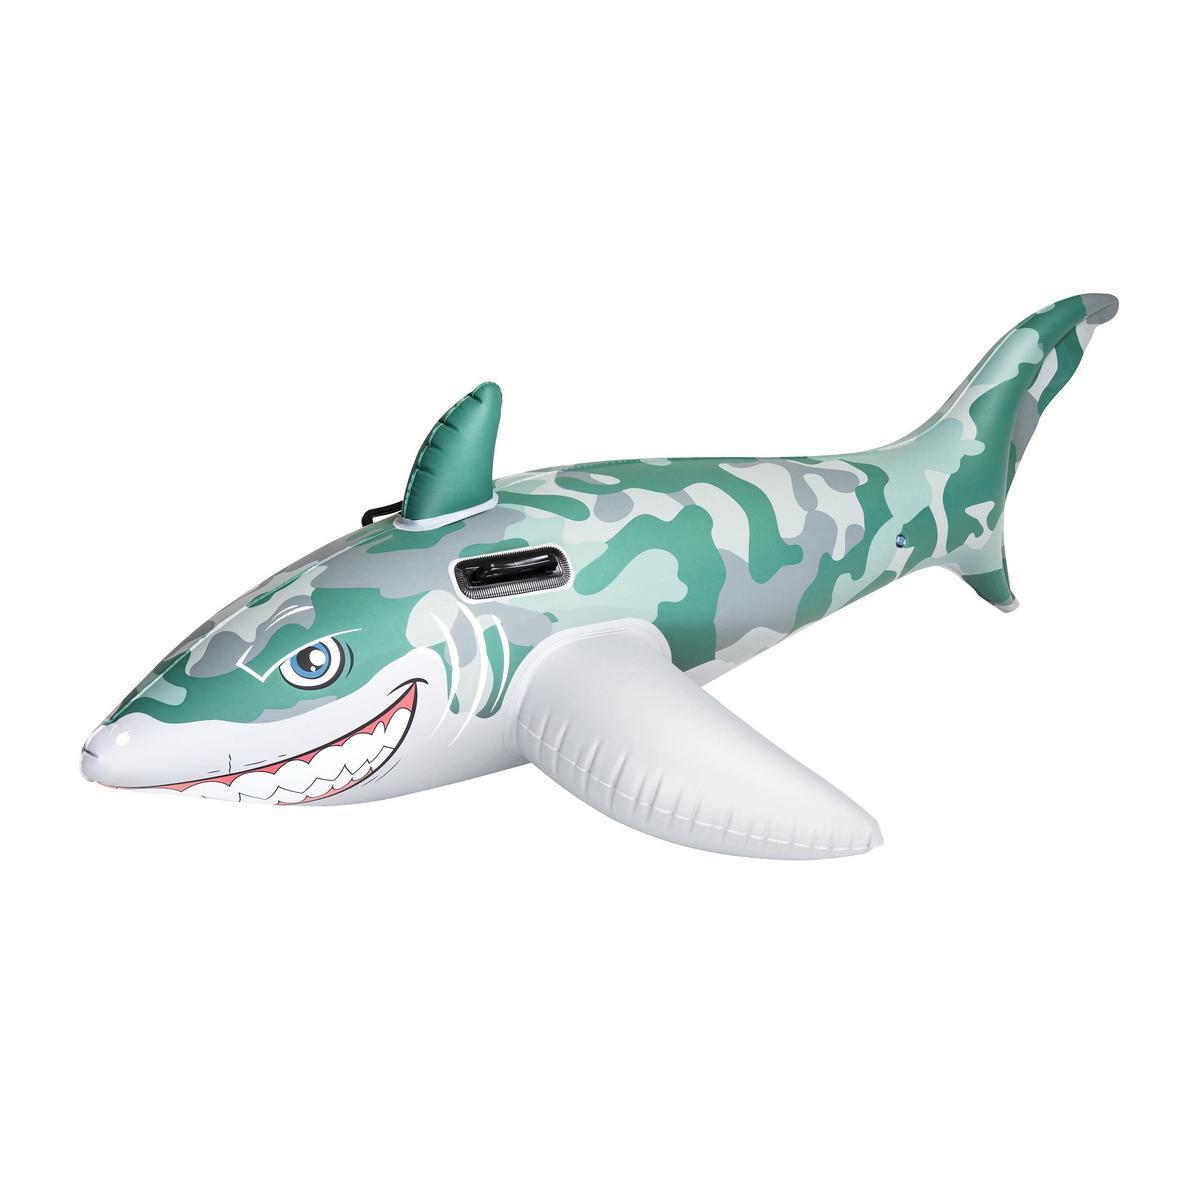 Requin gonflable chevauchable